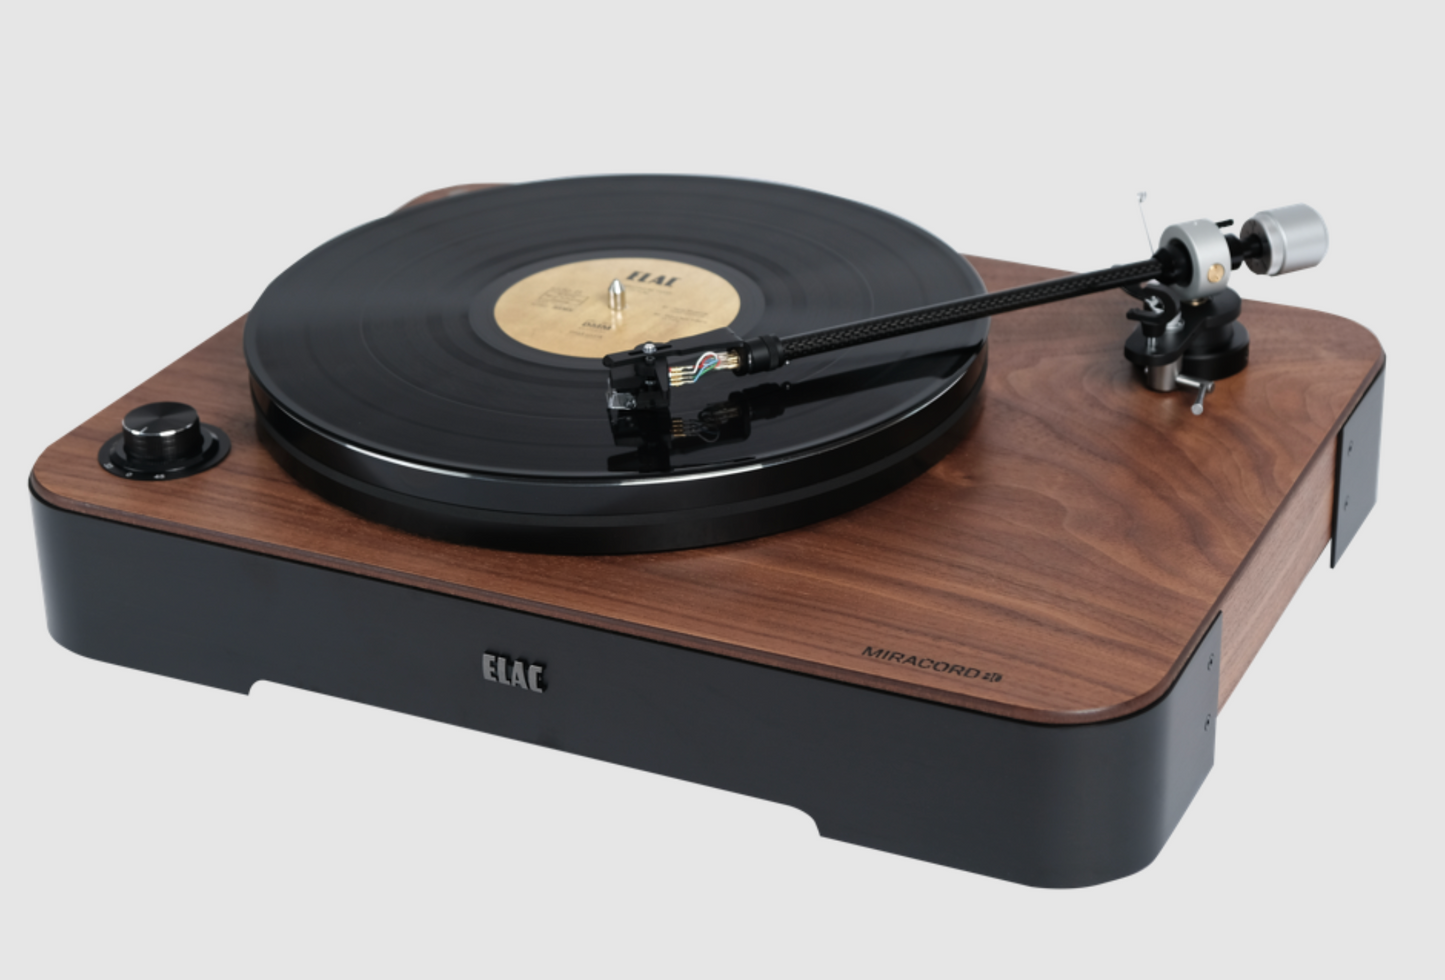 Elac Miracord 80 Turntable - No Cartridge